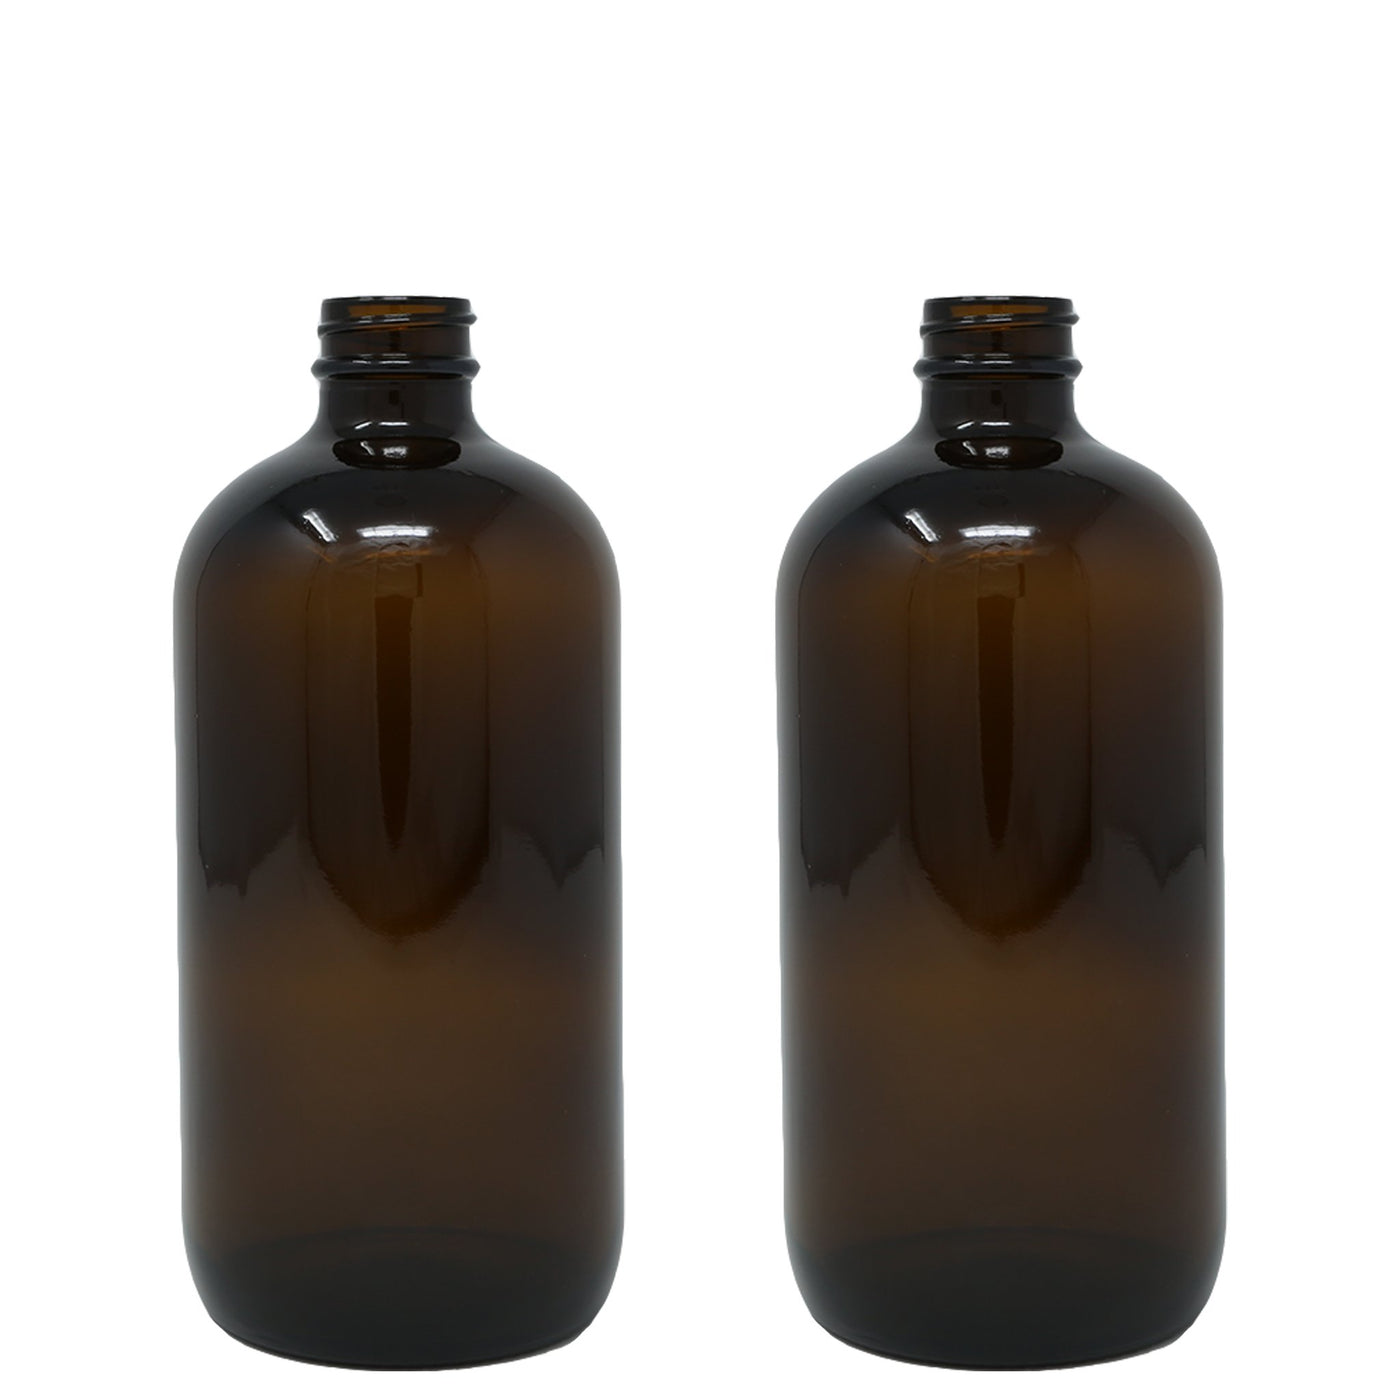 480ml (16oz) Amber Glass Boston Round Bottle Only - Oil Life Canada - Canada's Best Essential Oil Supplies